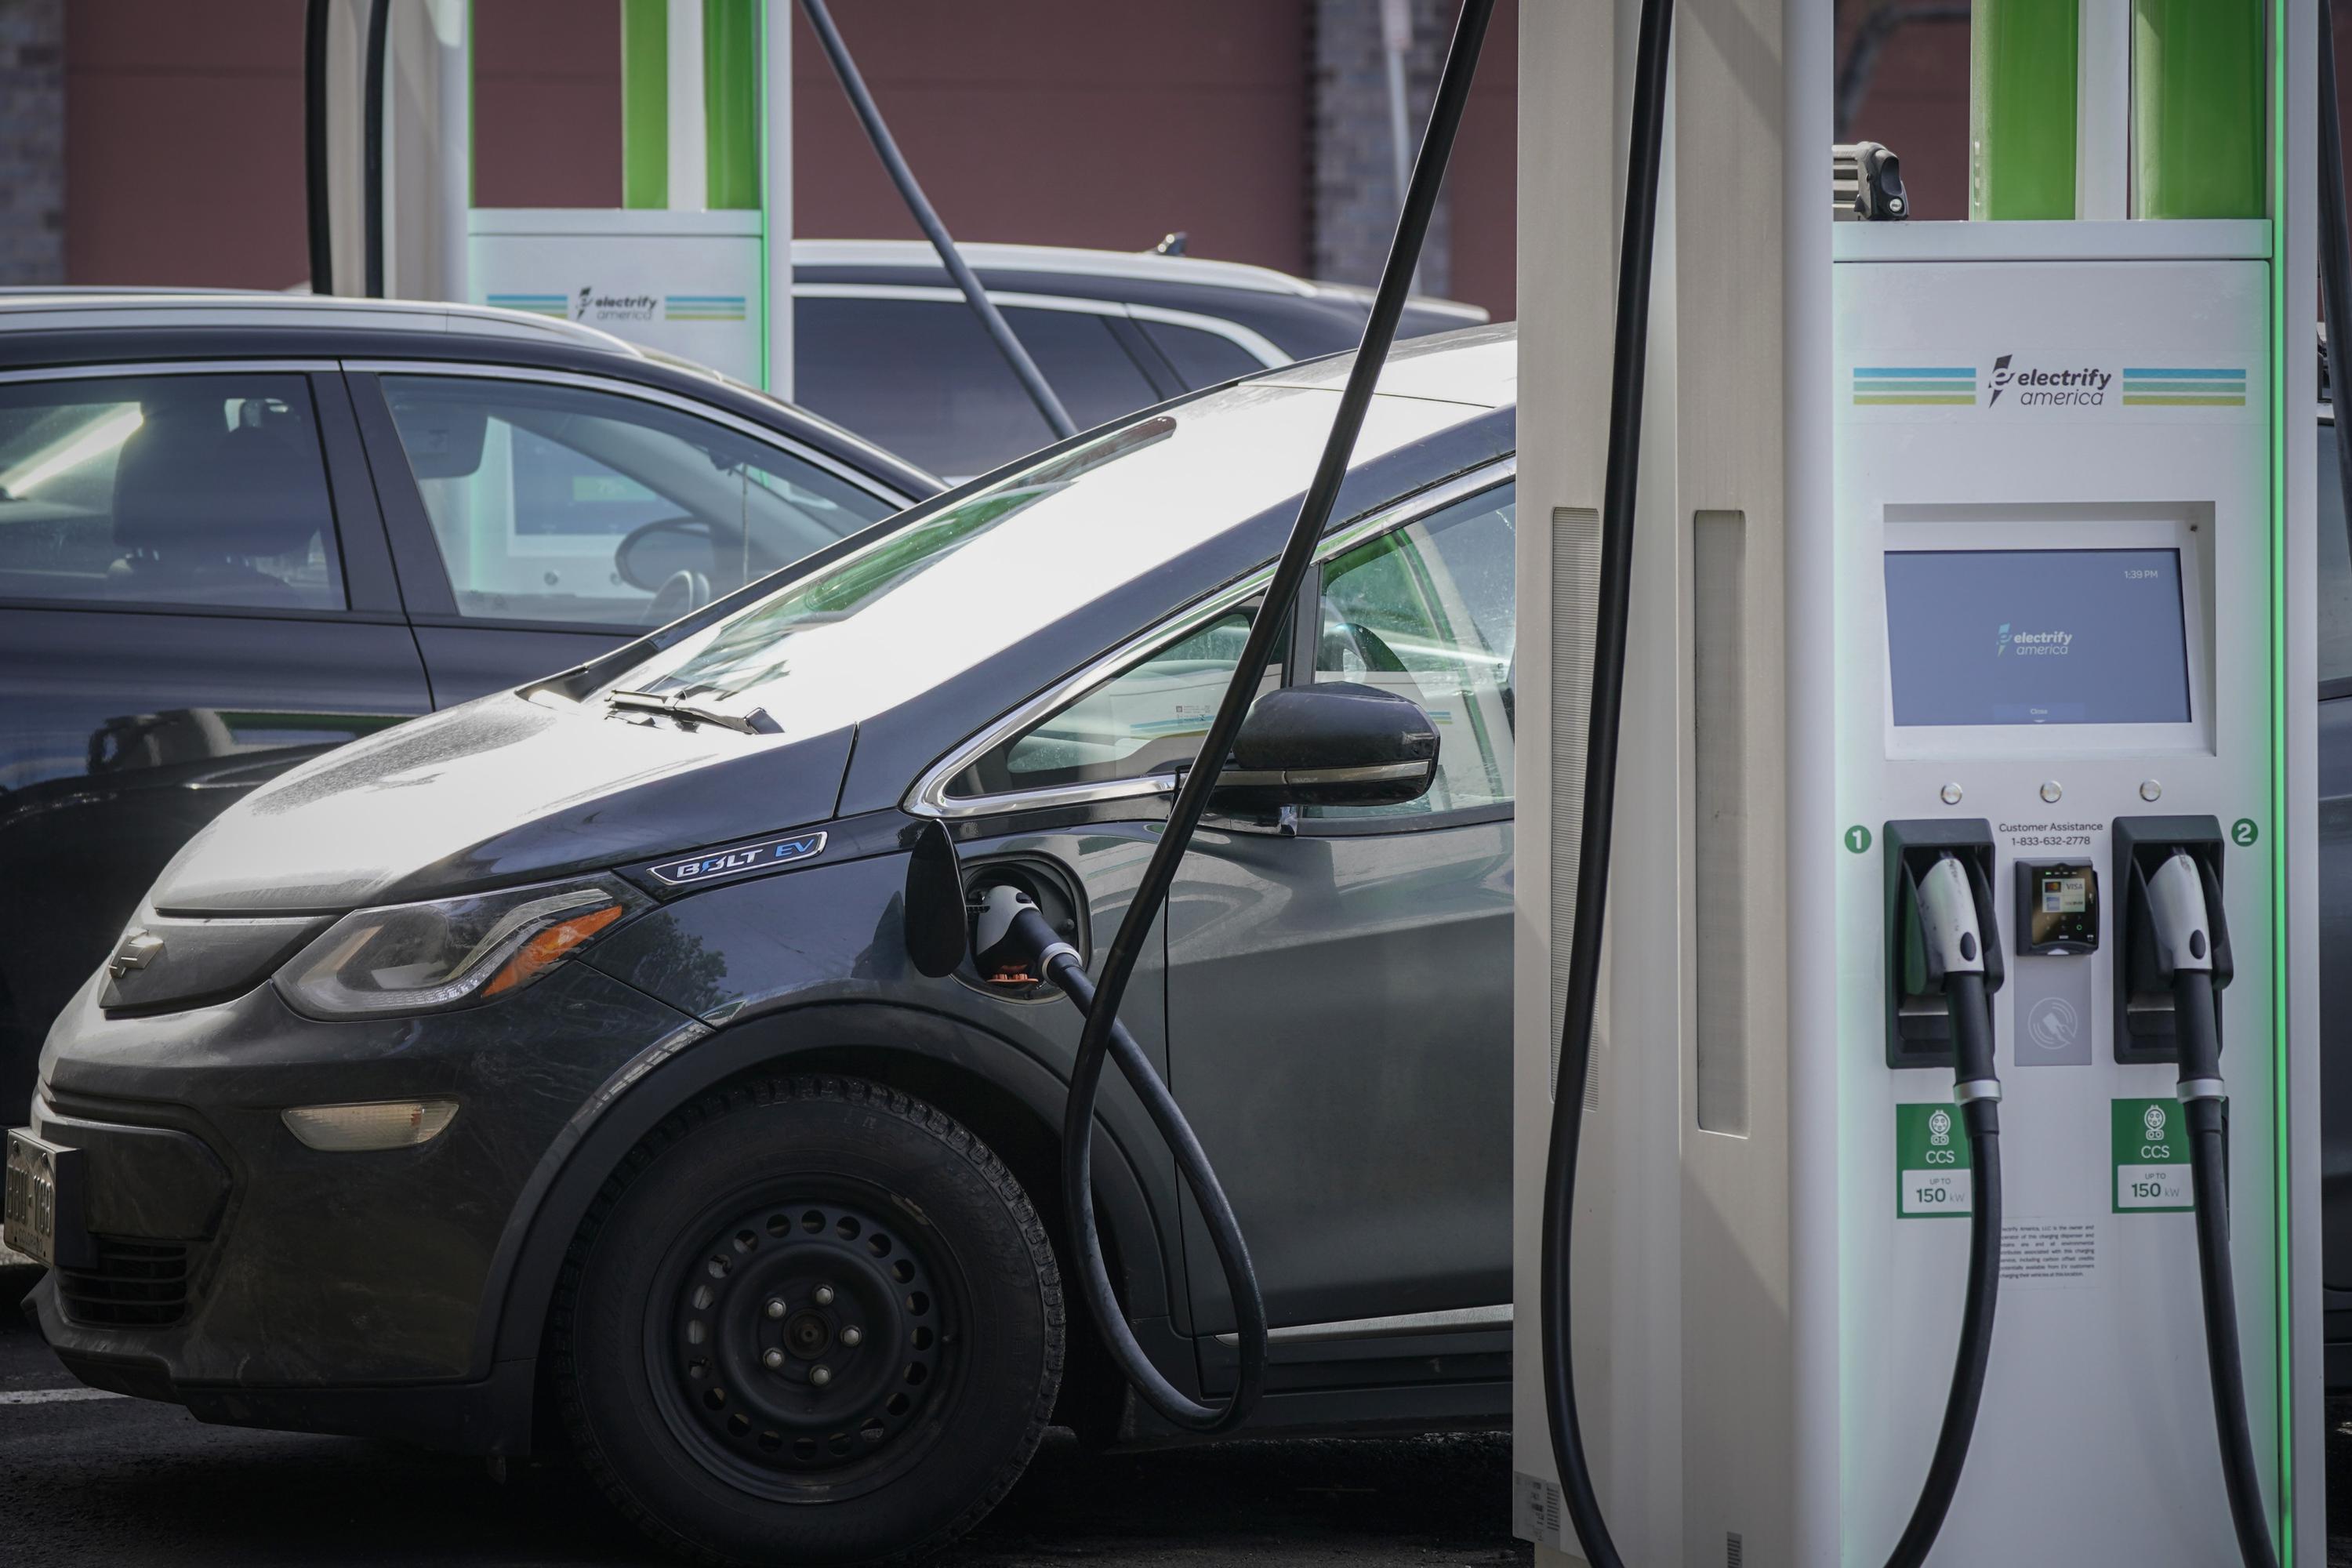 connecticut-adds-more-electric-vehicles-to-rebate-program-ap-news